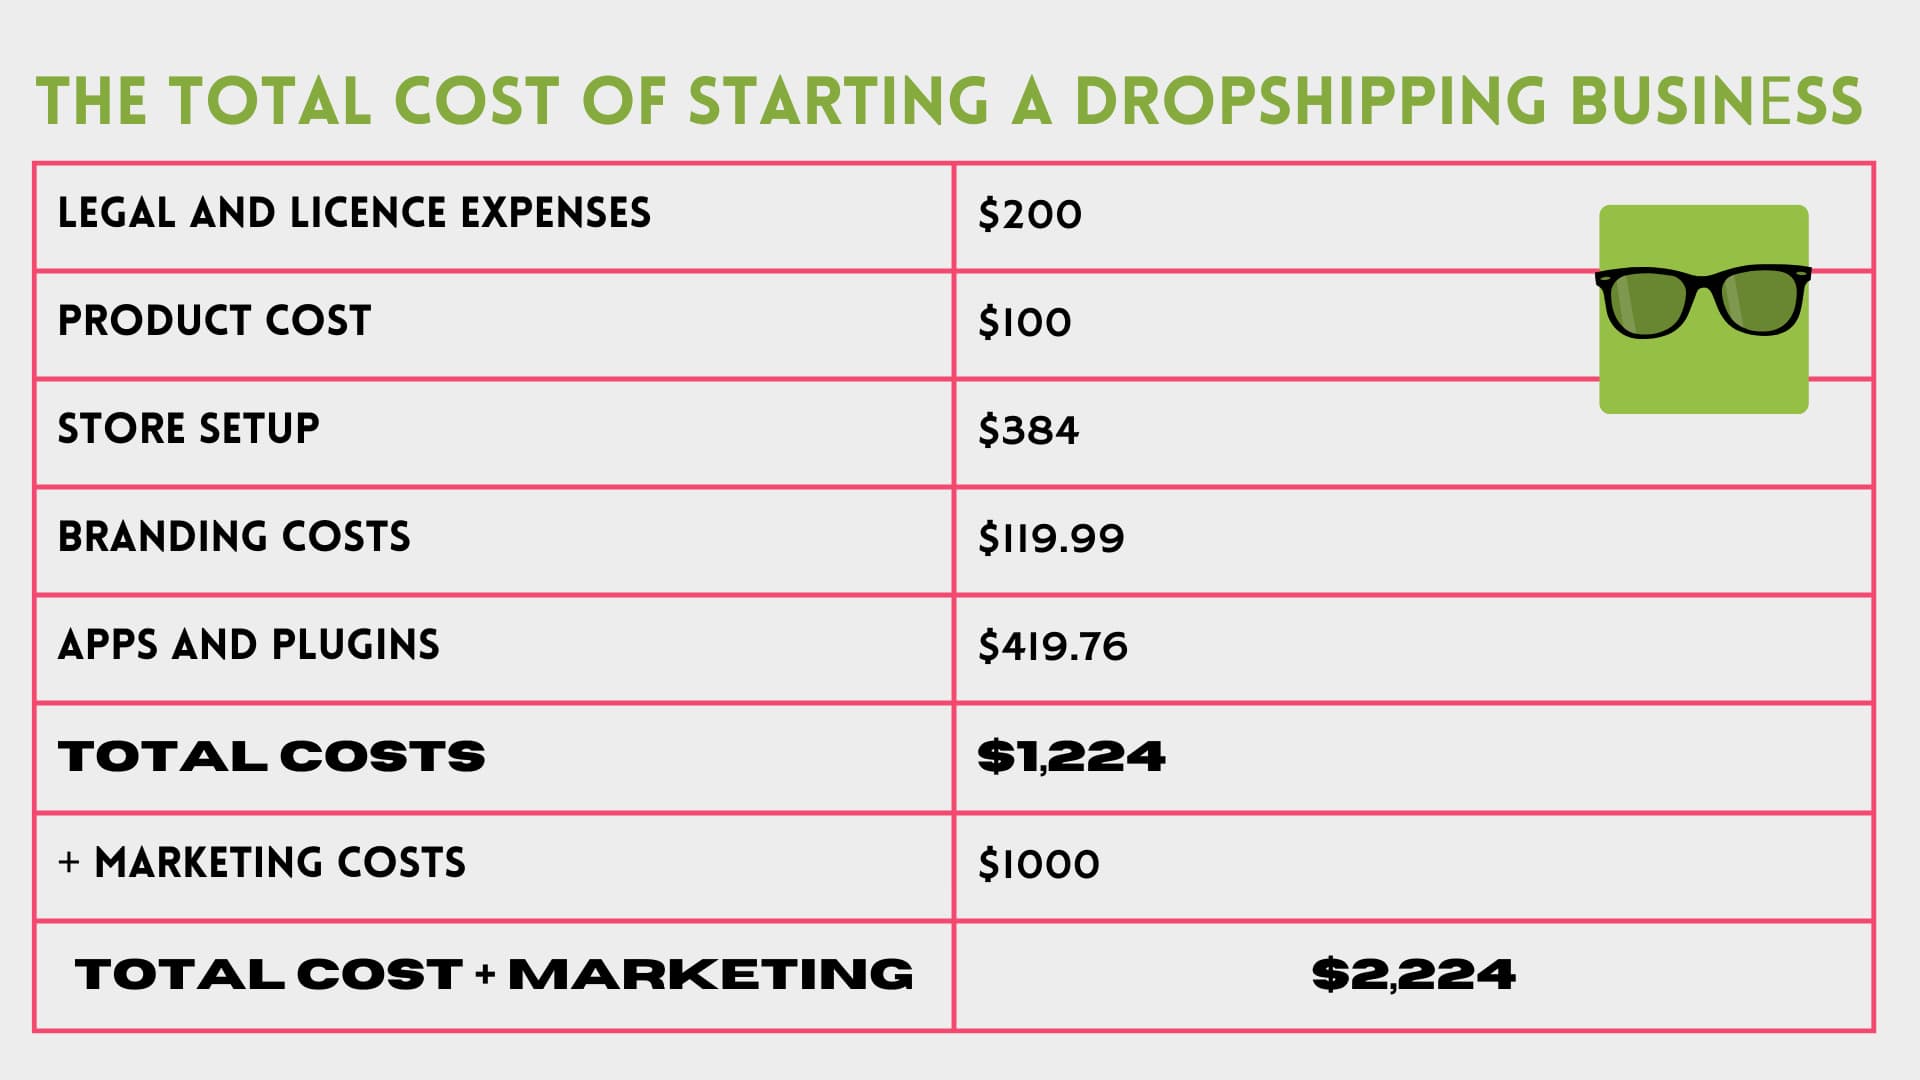 total cost in figures using dollars of everything needed to start dropshipping